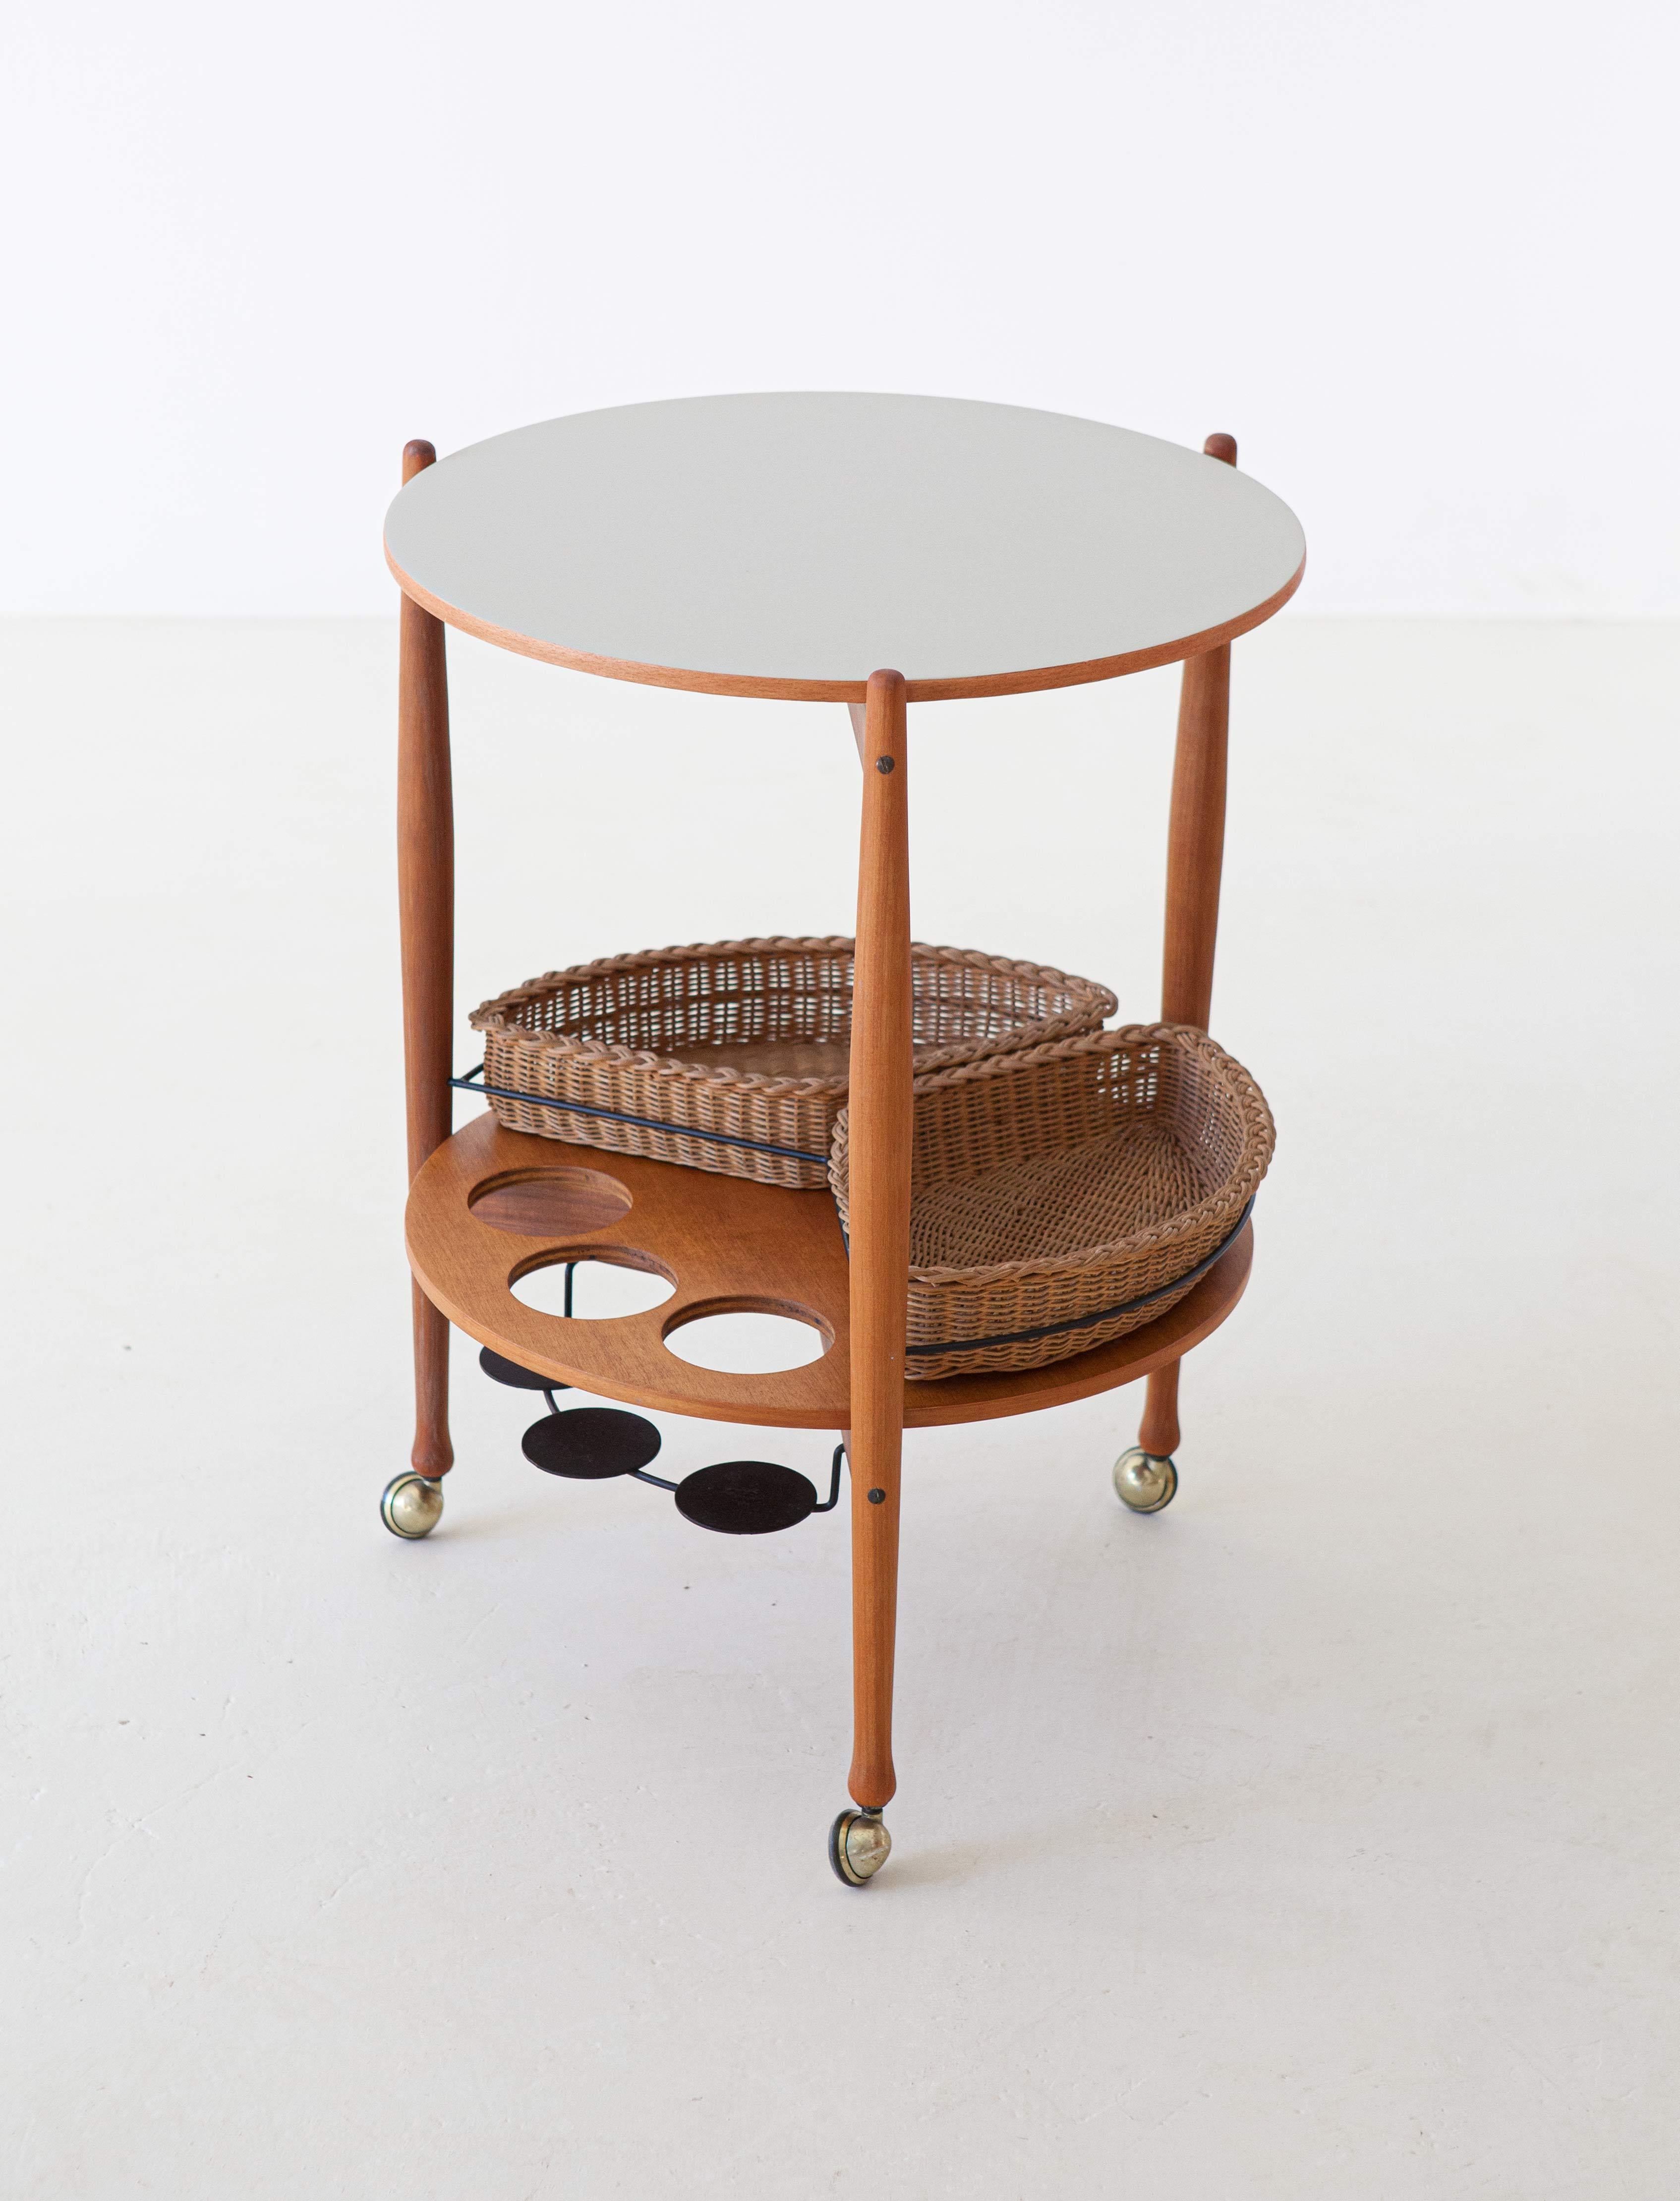 This rare midcentury trolley table was designed and manufactured by Fratelli Reguitti in Italy during the 1950s. 

This bar cart it's made of beechwood with iron and brass details and wicker baskets. 

Completely restored.